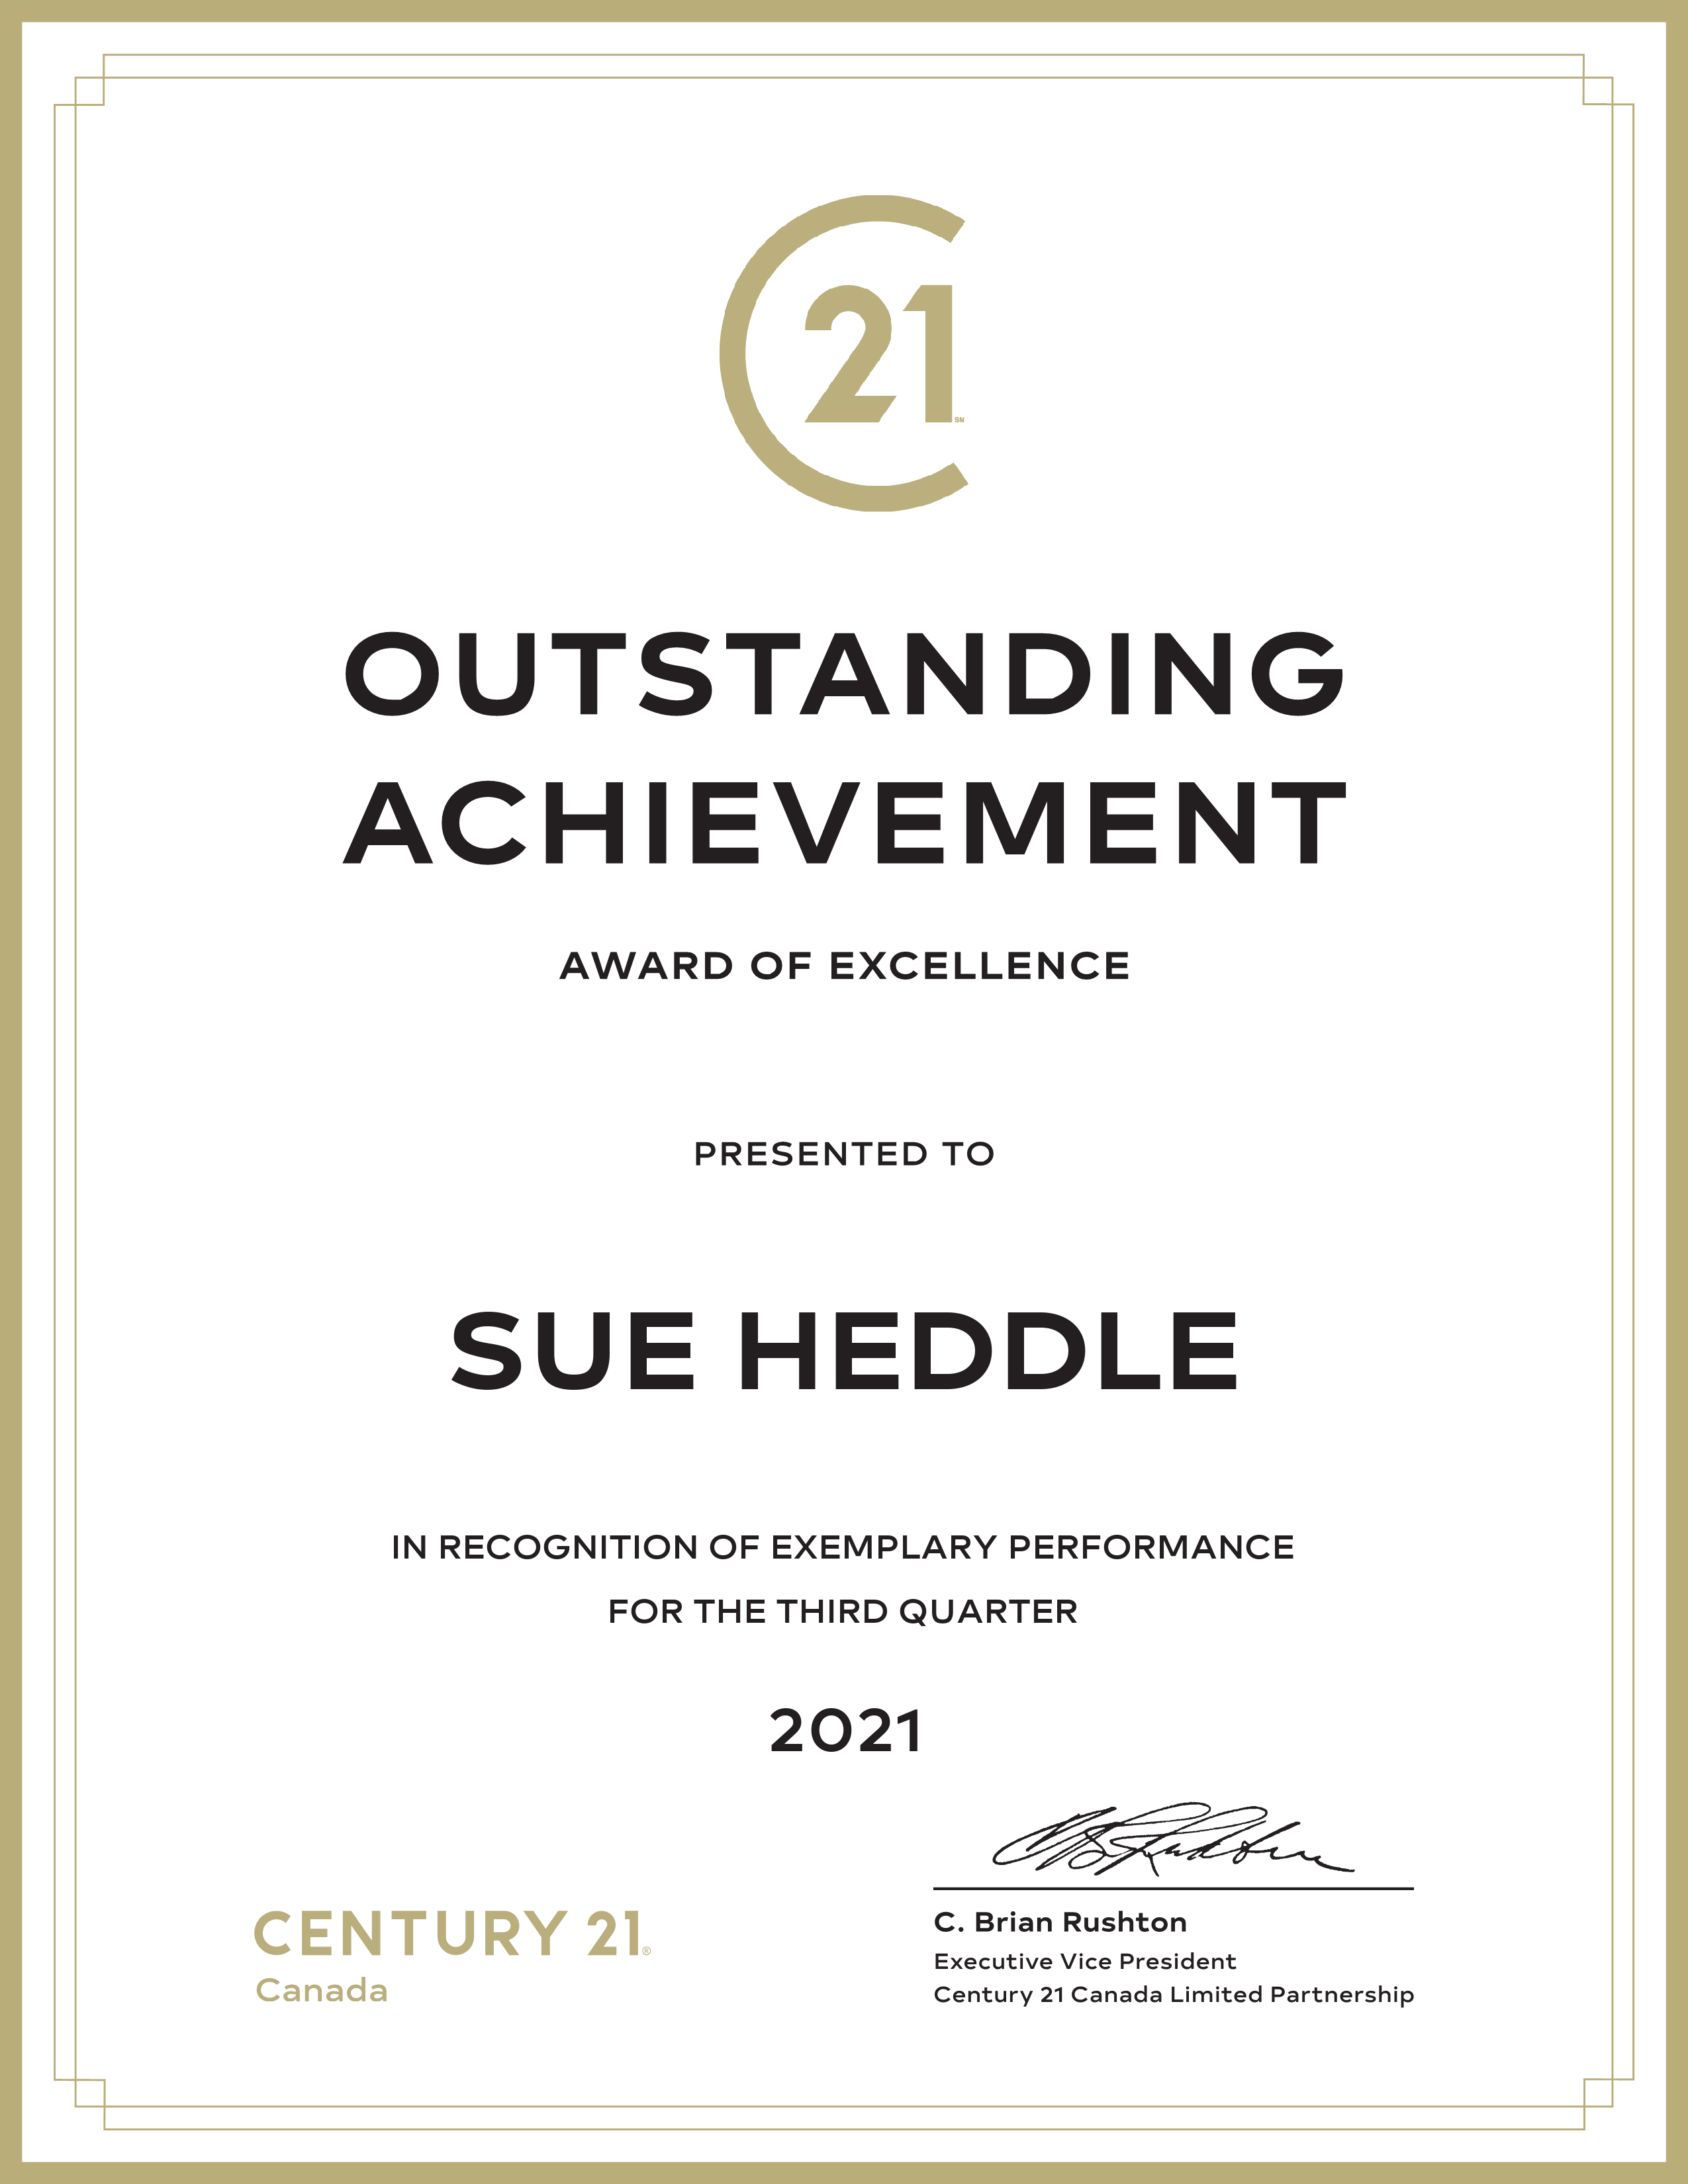 Sue Heddle Earns Third Quarter Recognition for Exemplary Performance 